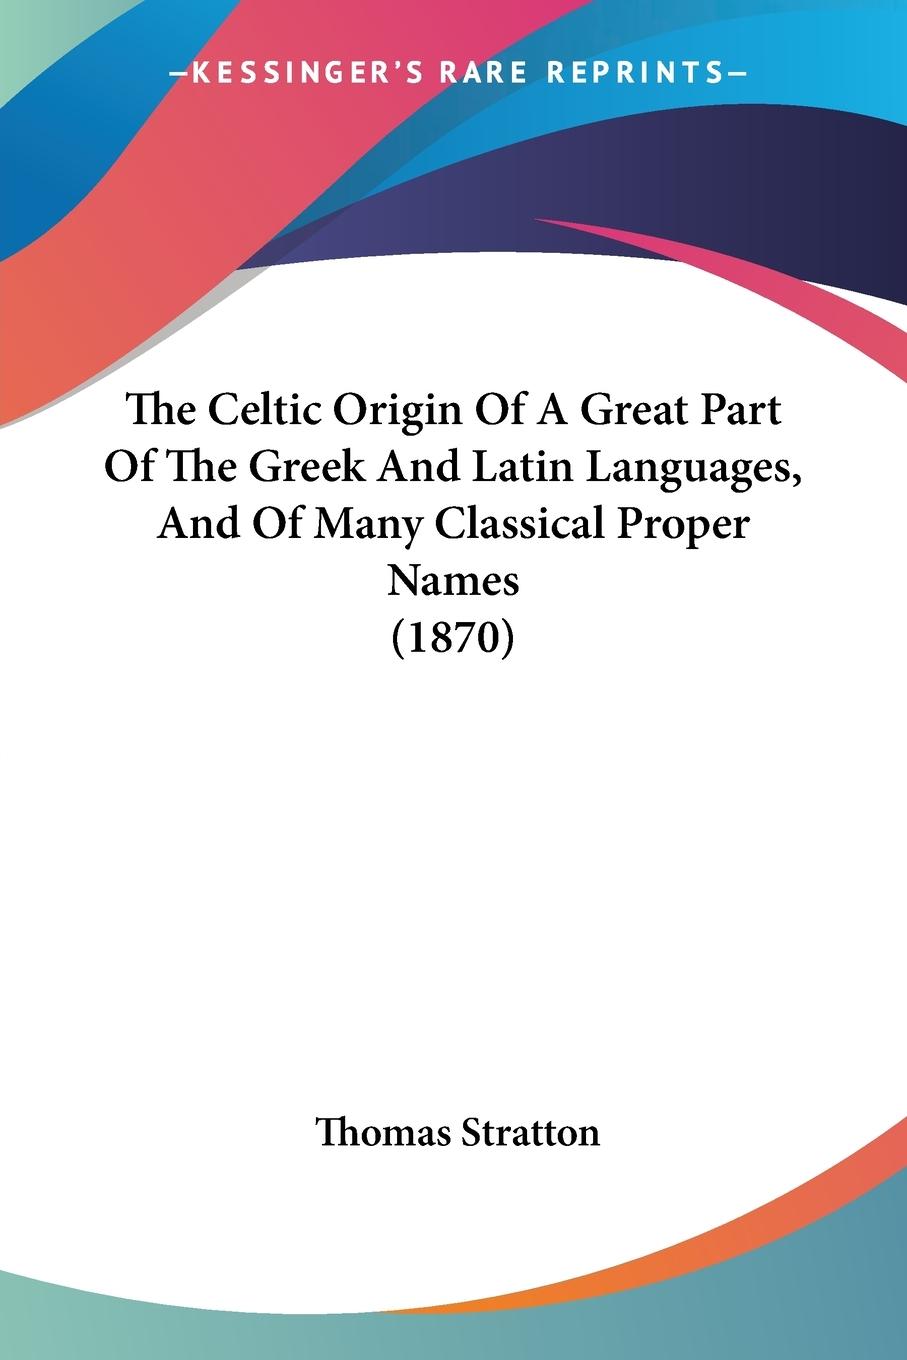 The Celtic Origin Of A Great Part Of The Greek And Latin Languages, And Of Many Classical Proper Names (1870) - Stratton, Thomas